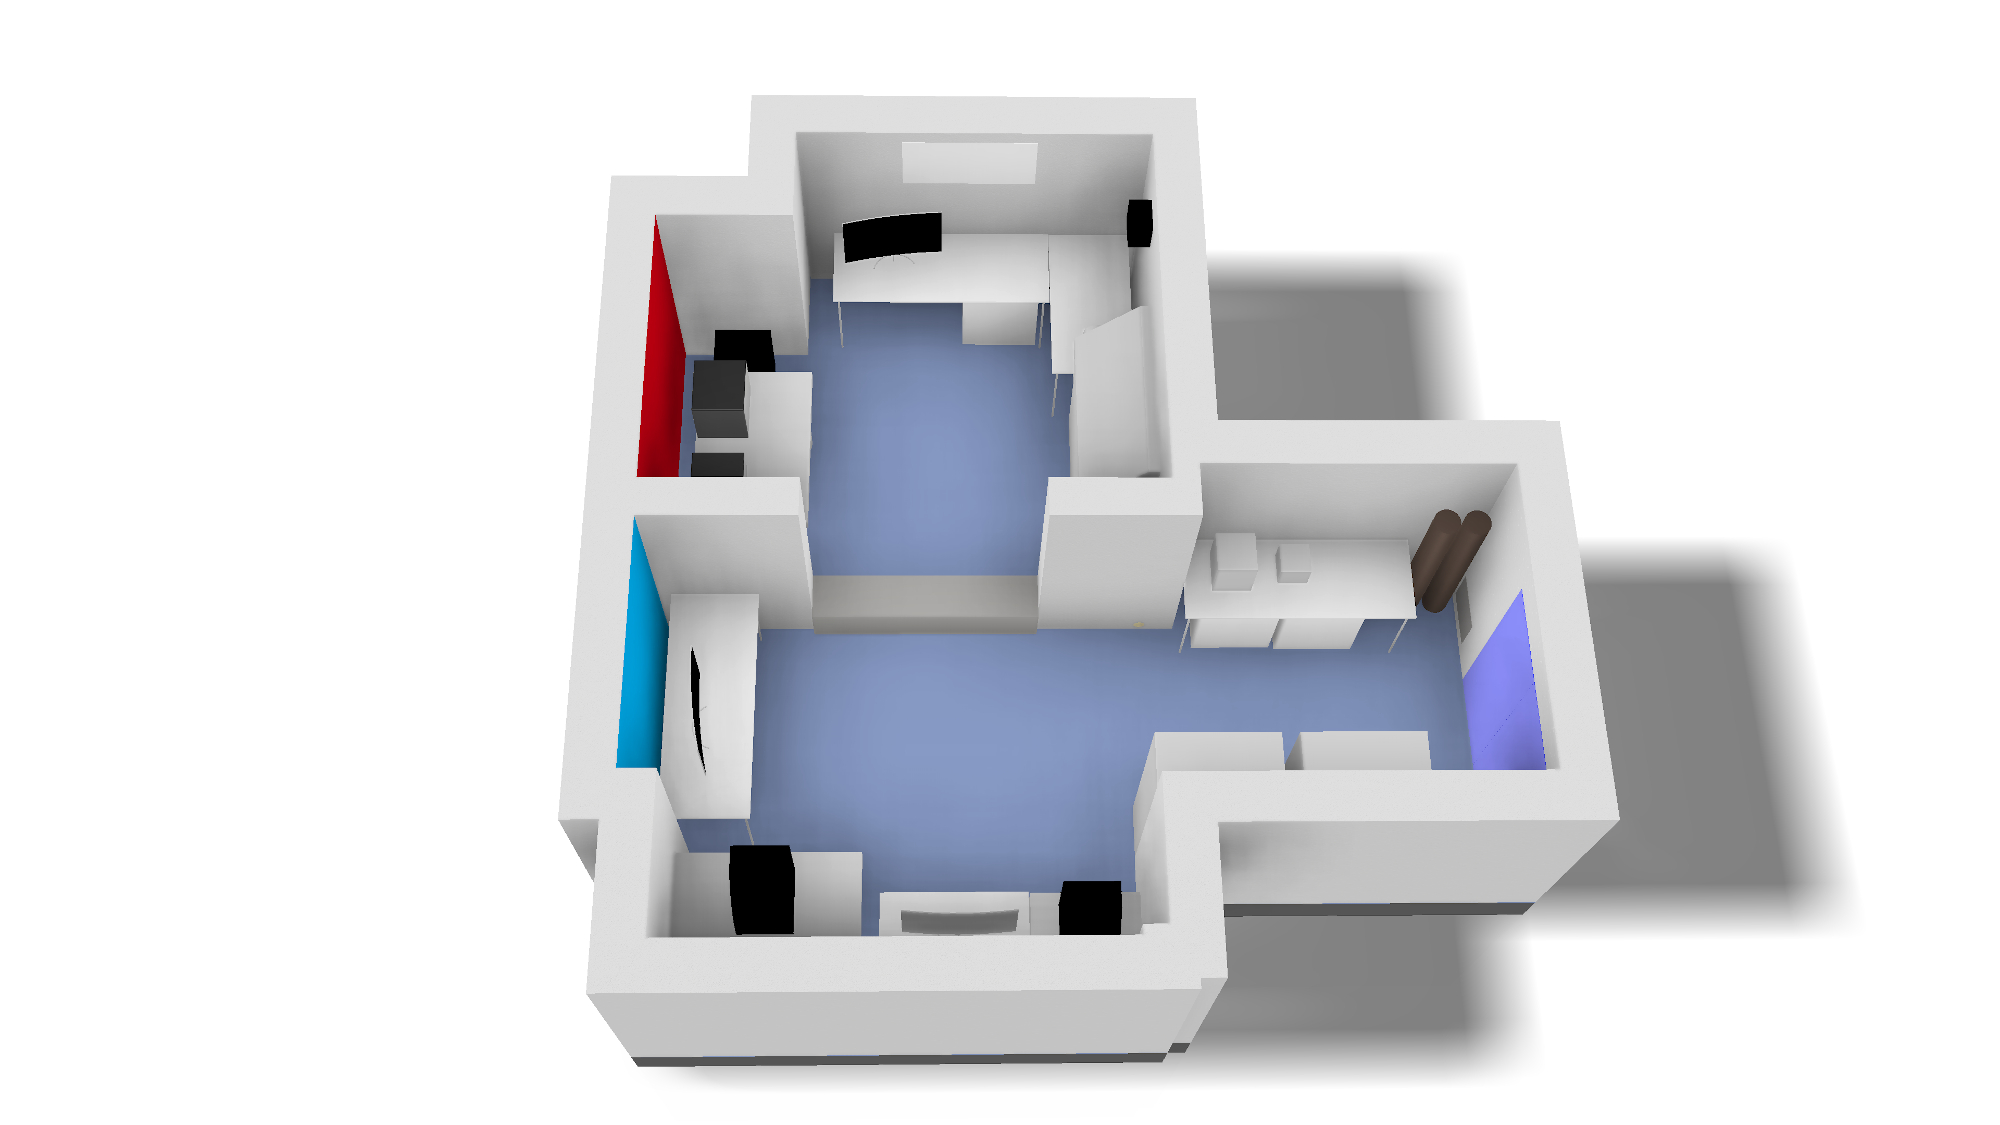 Layout of ANM lab